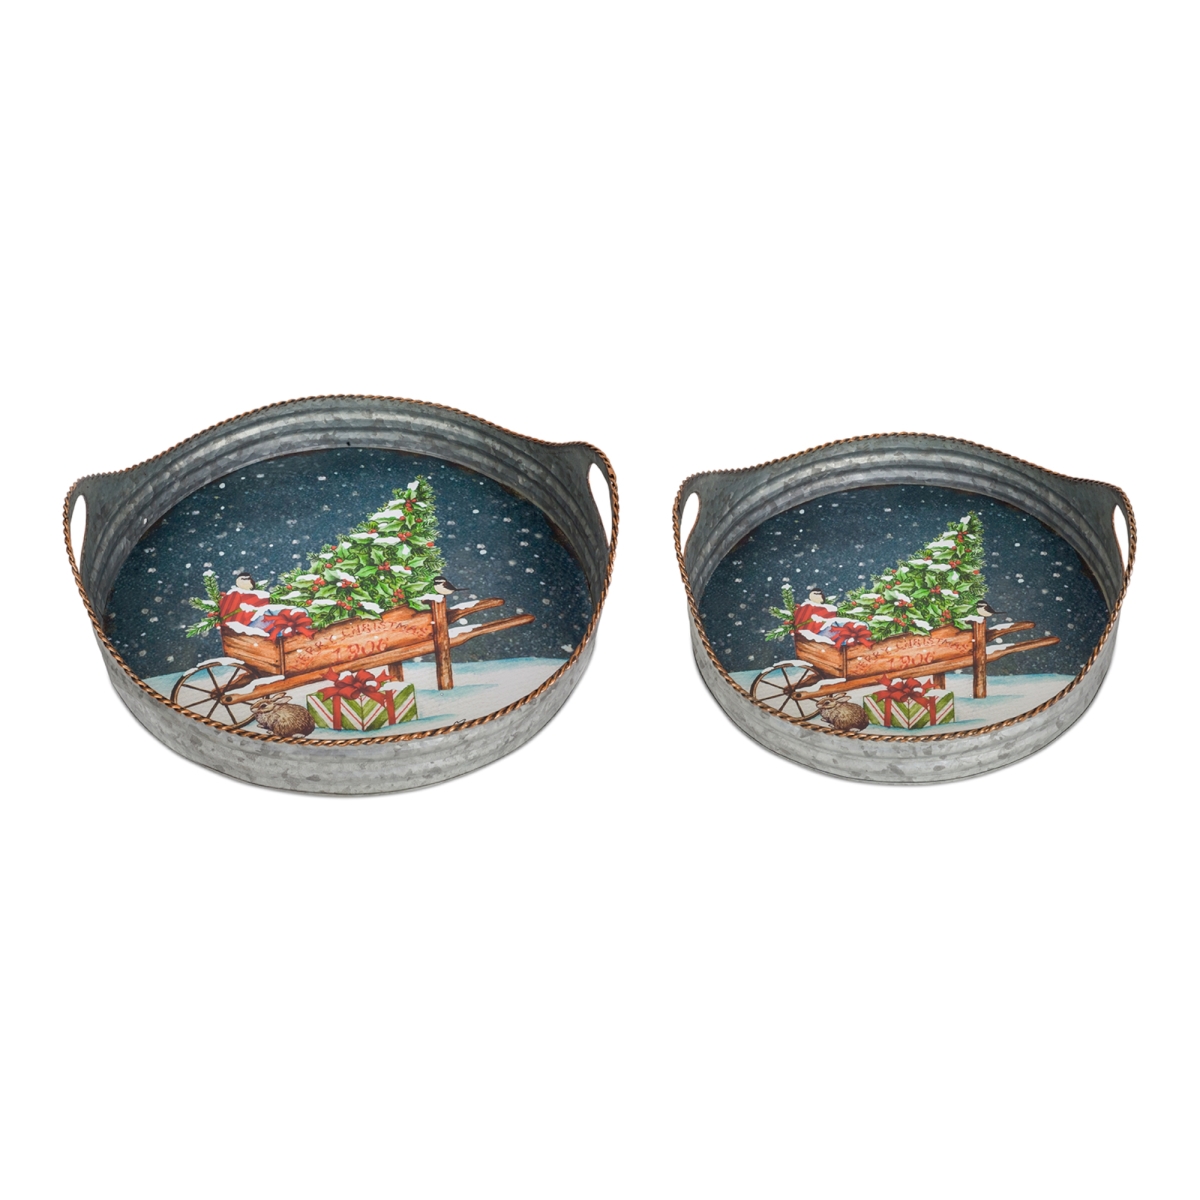 72184ds 14.75 X 17.5 In. Metal Tray, Tin & Blue - Set Of 2